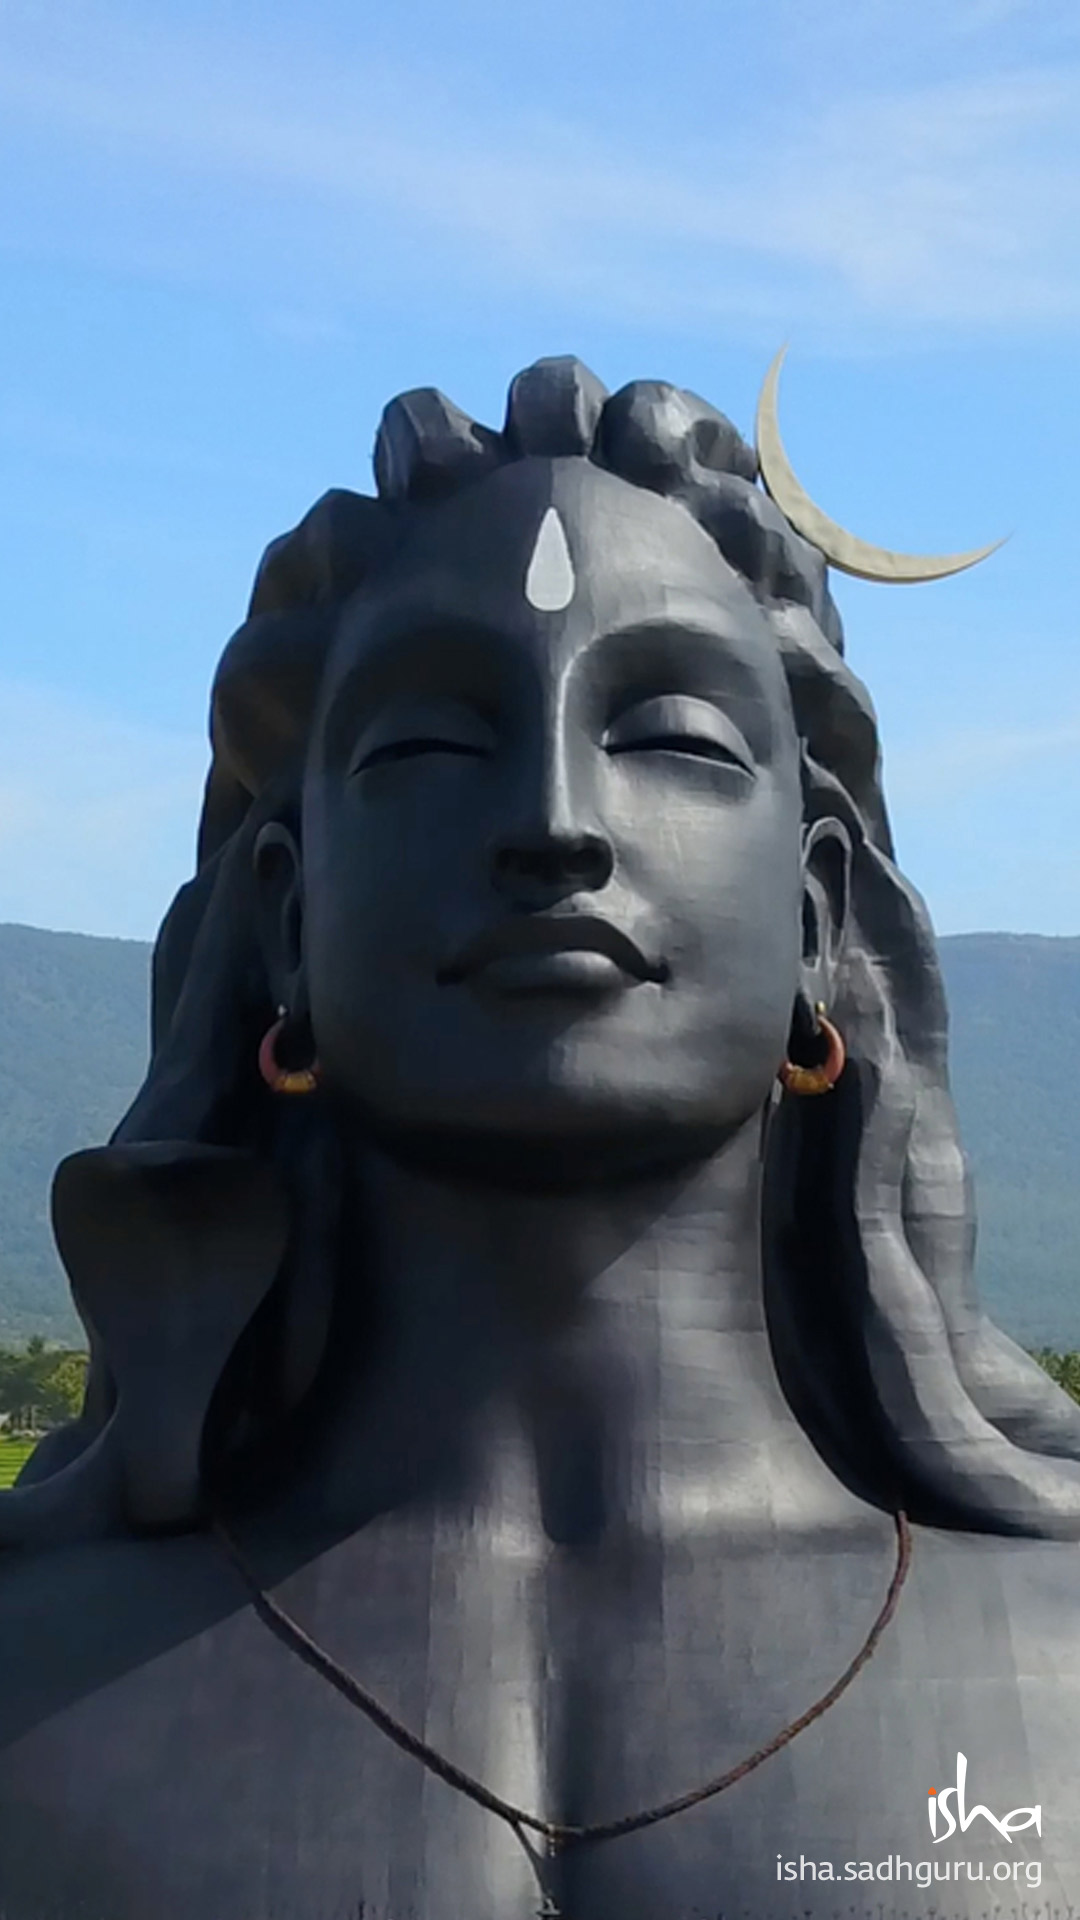 60 Shiva Adiyogi Wallpapers Hd Free Download For Mobile And Desktop 17 images of shiv parvati marriage. 60 shiva adiyogi wallpapers hd free